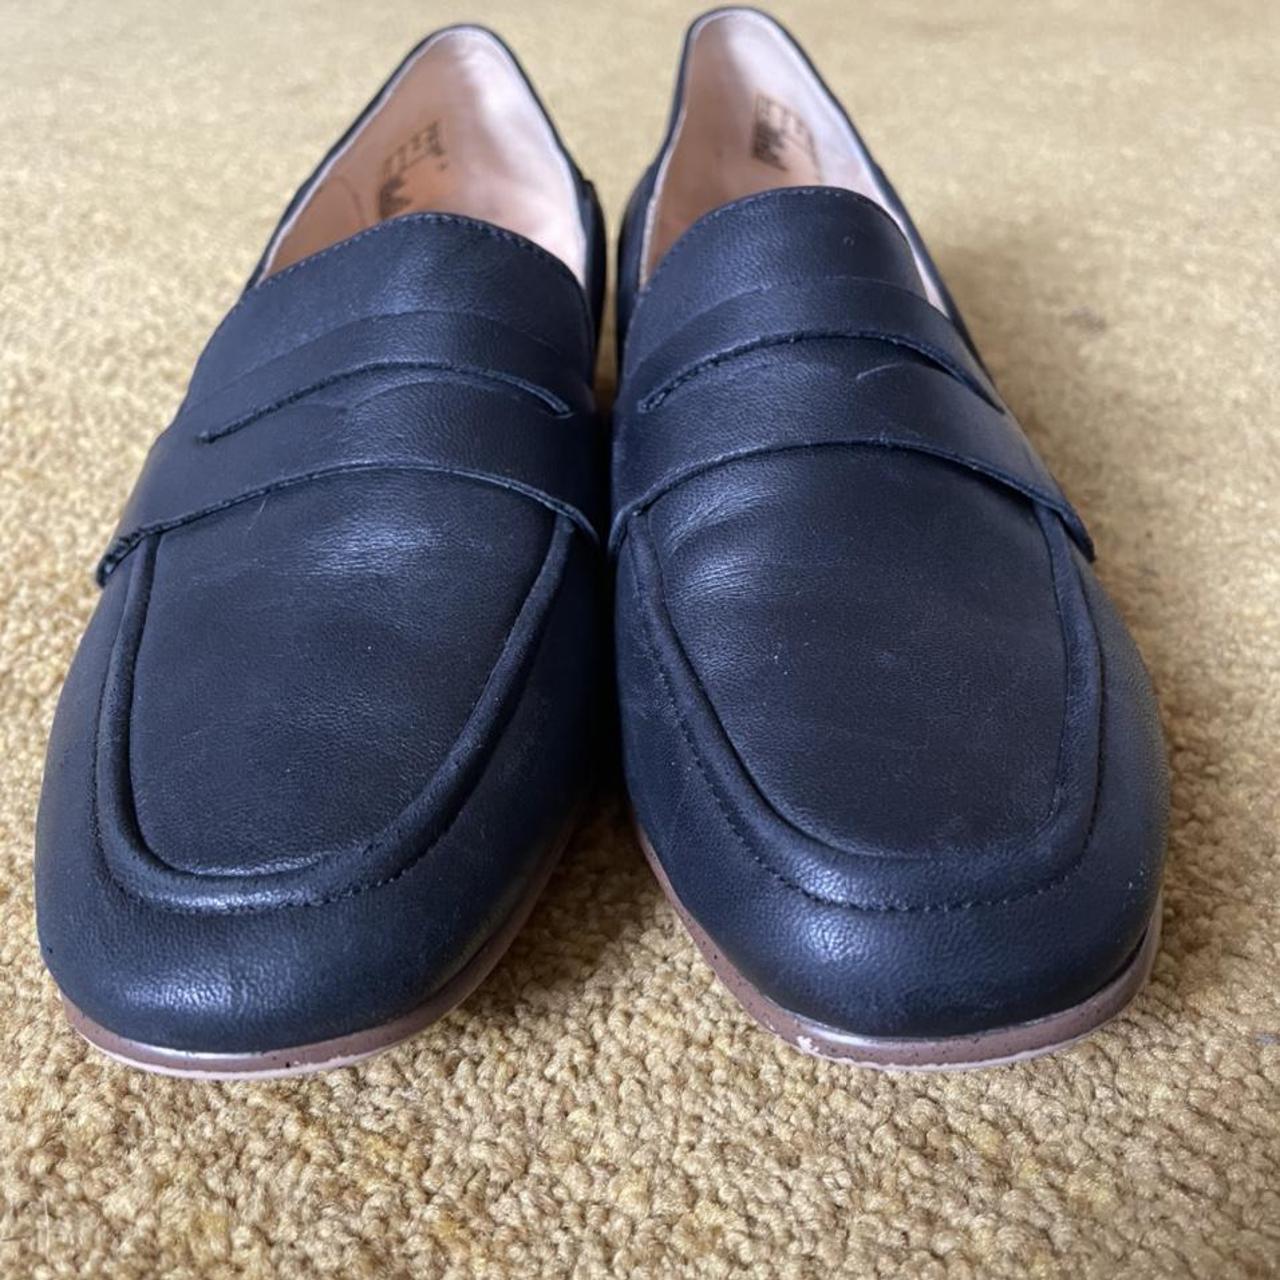 Clarks Genuine Navy Leather Loafers. So comfy and... - Depop